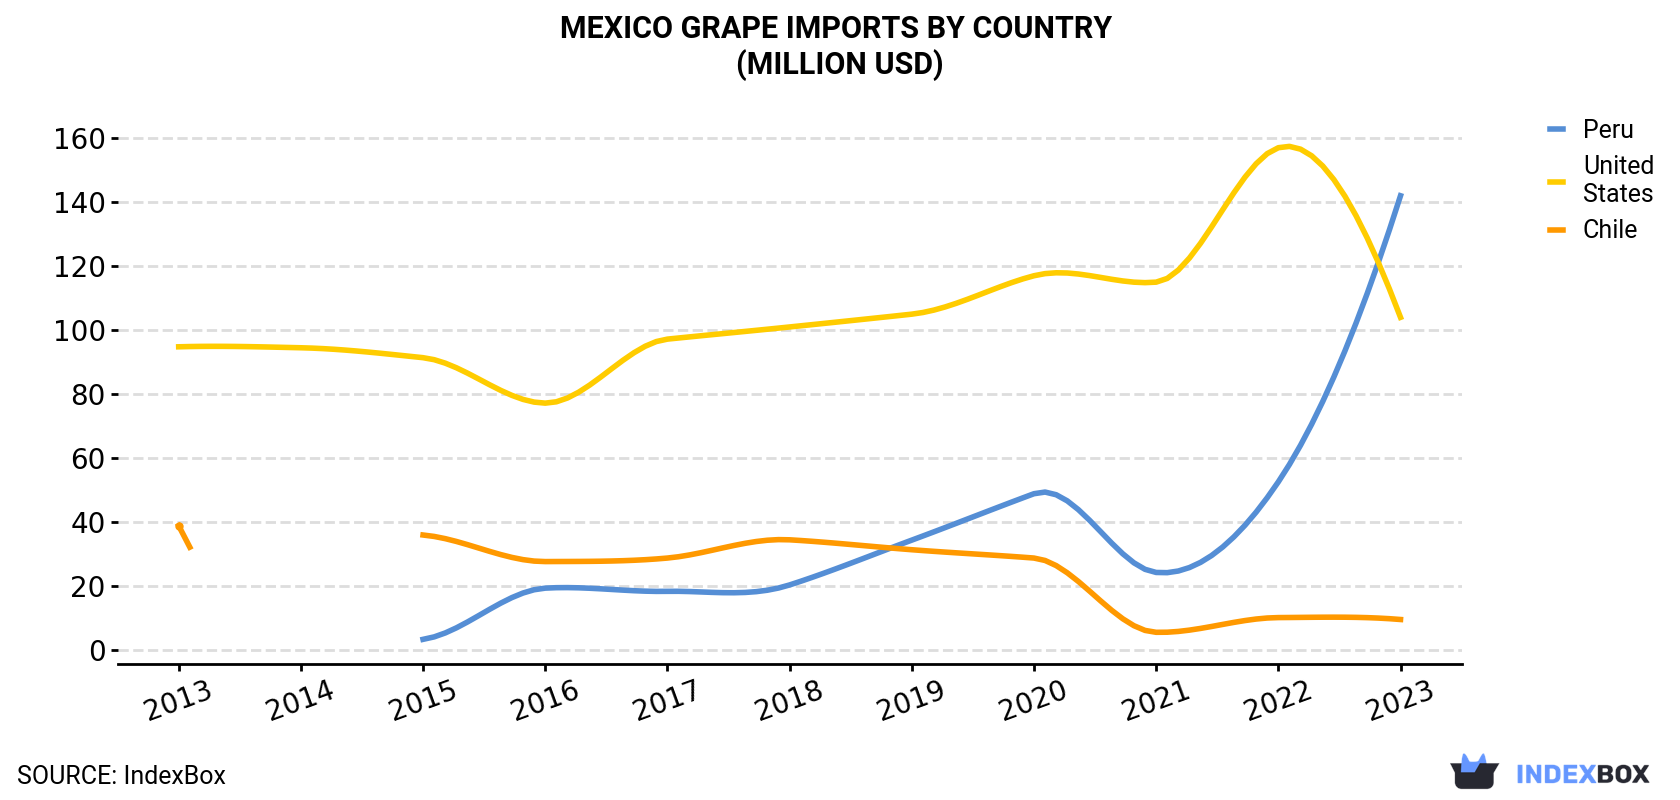 Mexico Grape Imports By Country (Million USD)